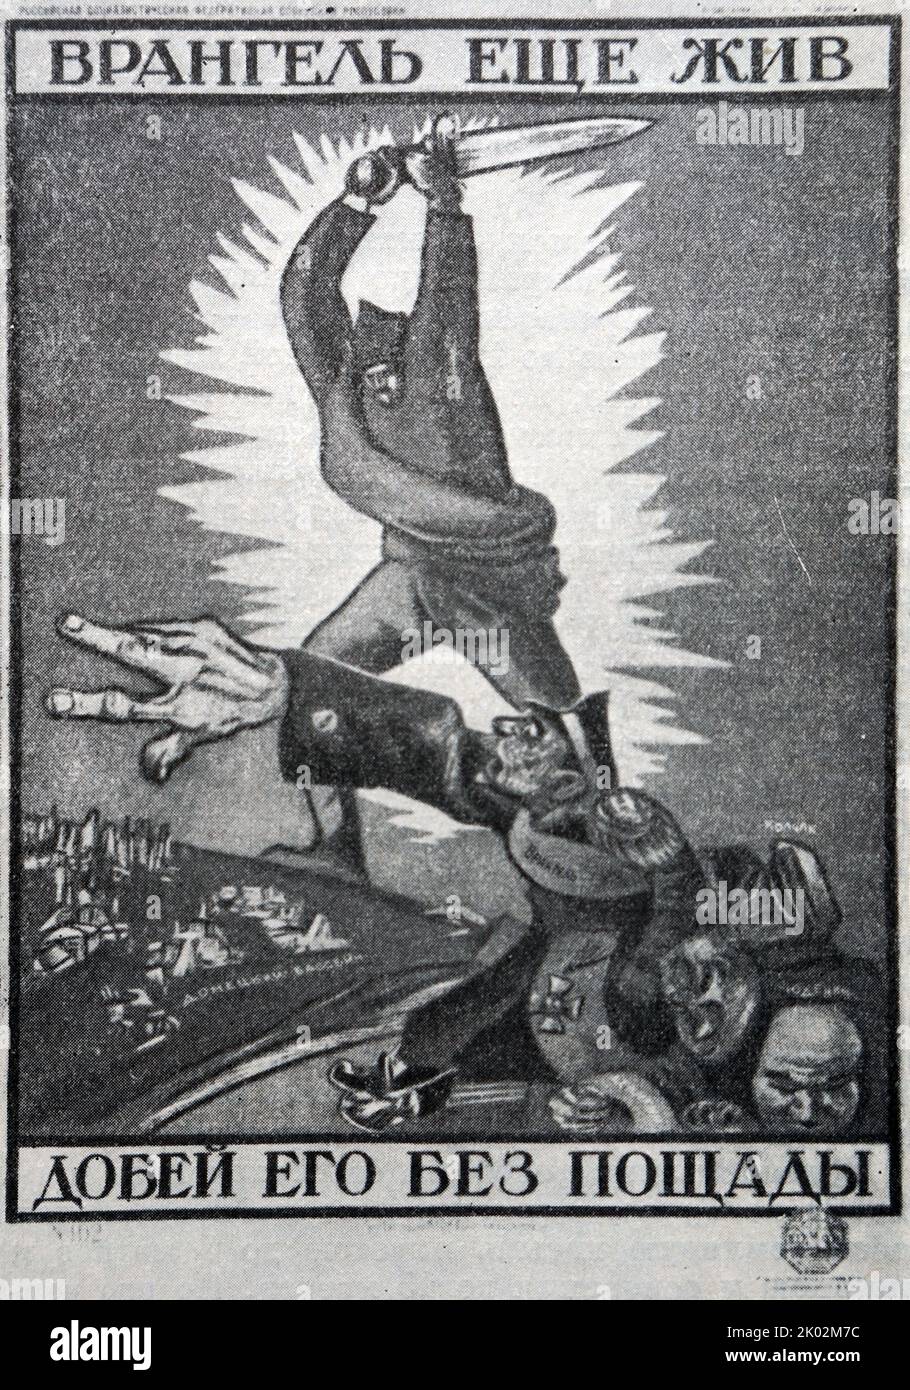 Bolshevik anti-Wrangel propaganda poster, 1919. Pyotr Wrangel (1878 - 1928) commanding general of the anti-Bolshevik White Army in Southern Russia. After his side lost the Russian Civil War, in 1920, he left Russia. He was known as one of the most prominent exiled White emigres[ Stock Photo